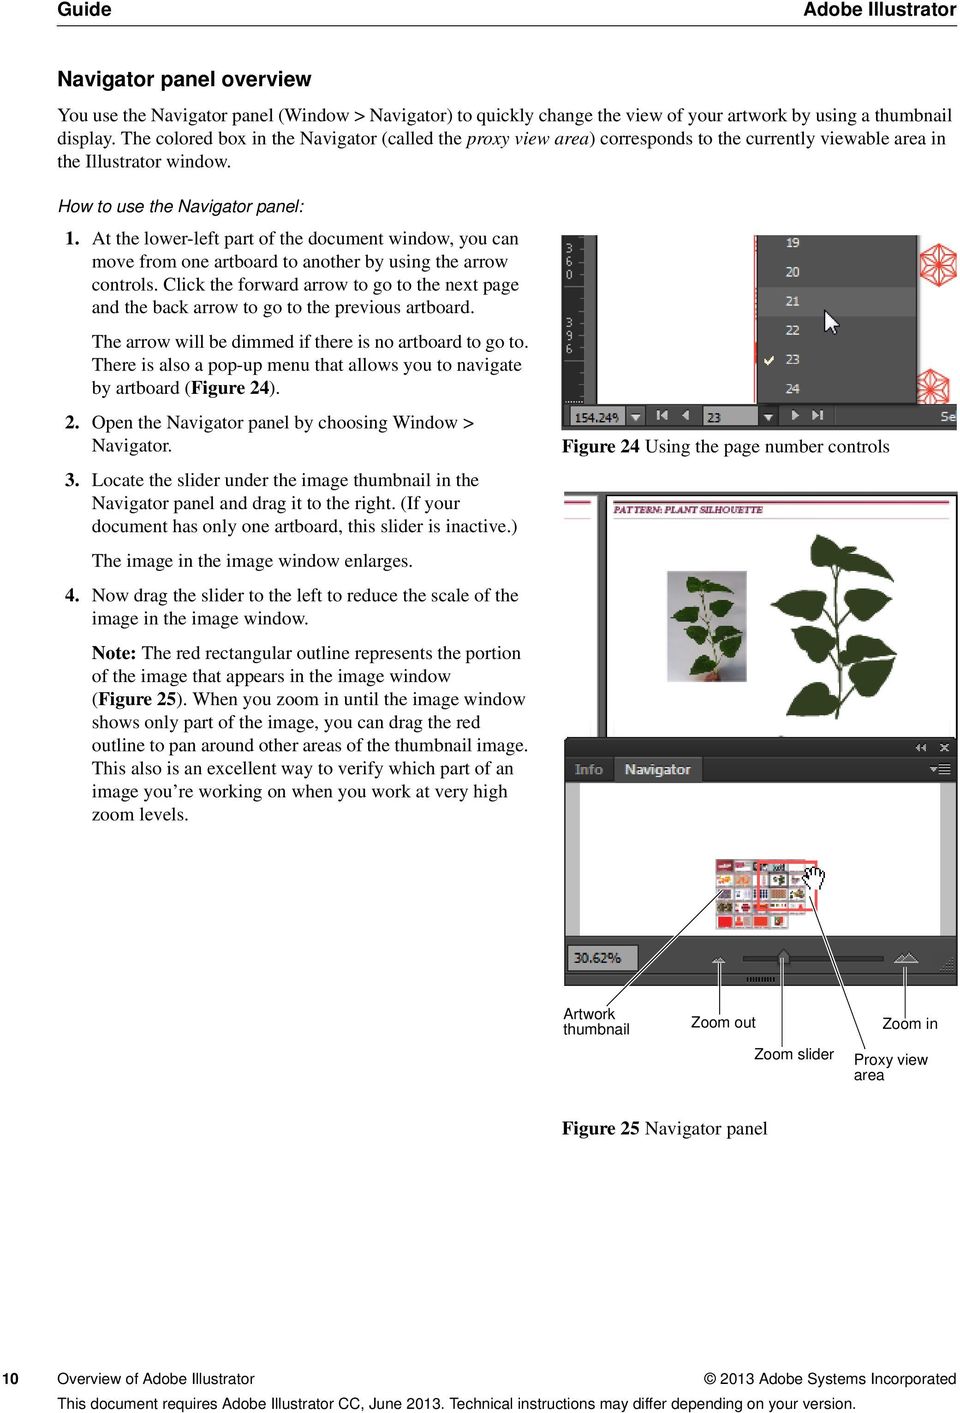 At the lower-left part of the document window, you can move from one artboard to another by using the arrow controls.